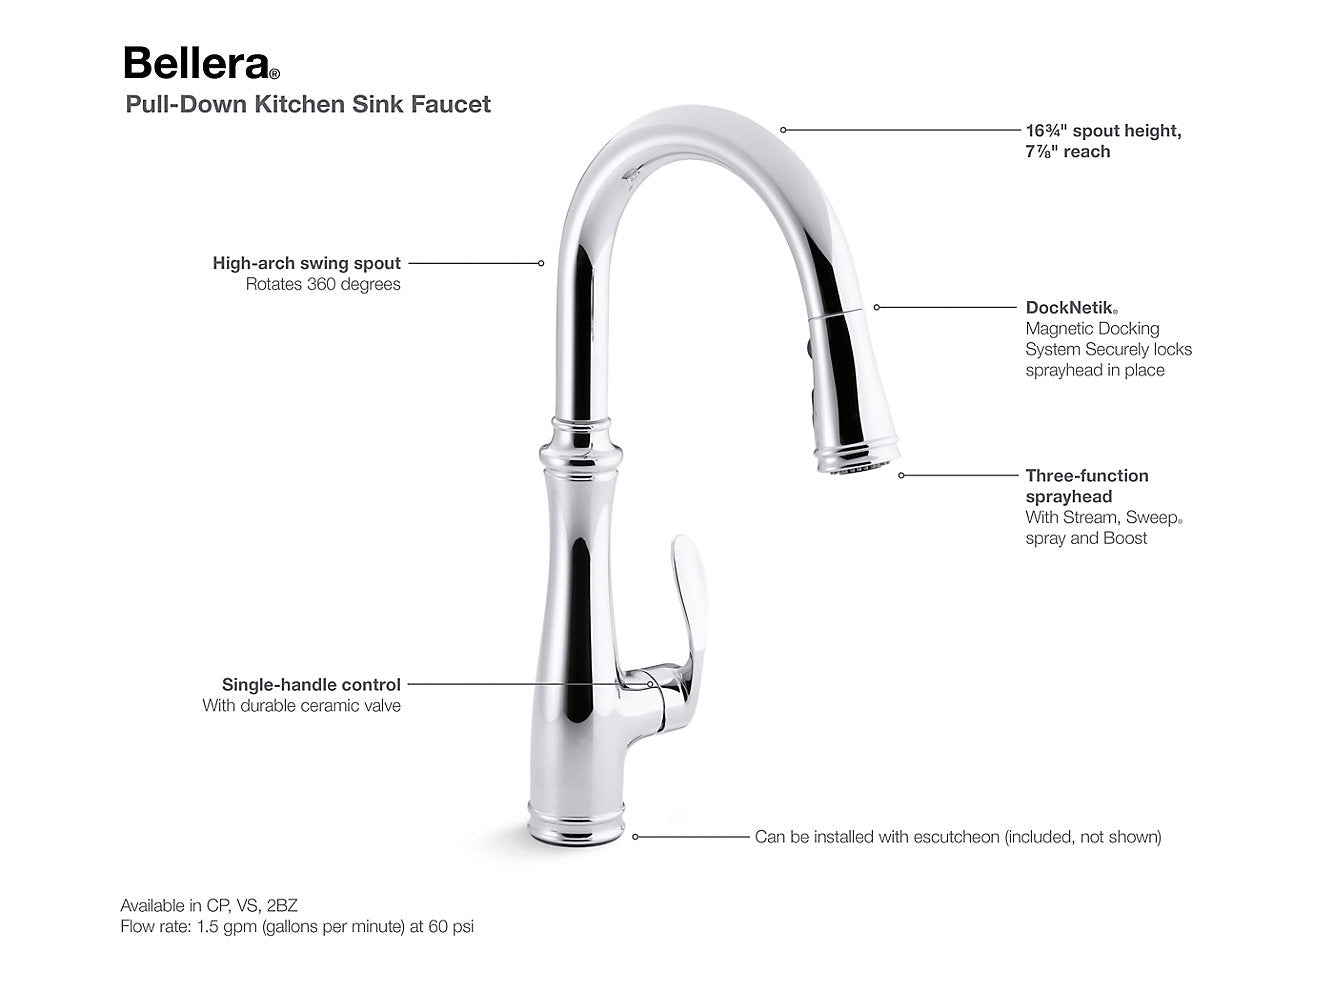 Kohler Bellera®Pull-Down Kitchen Sink Faucet With Three-Function Sprayhead - Oil Rubbed Bronze